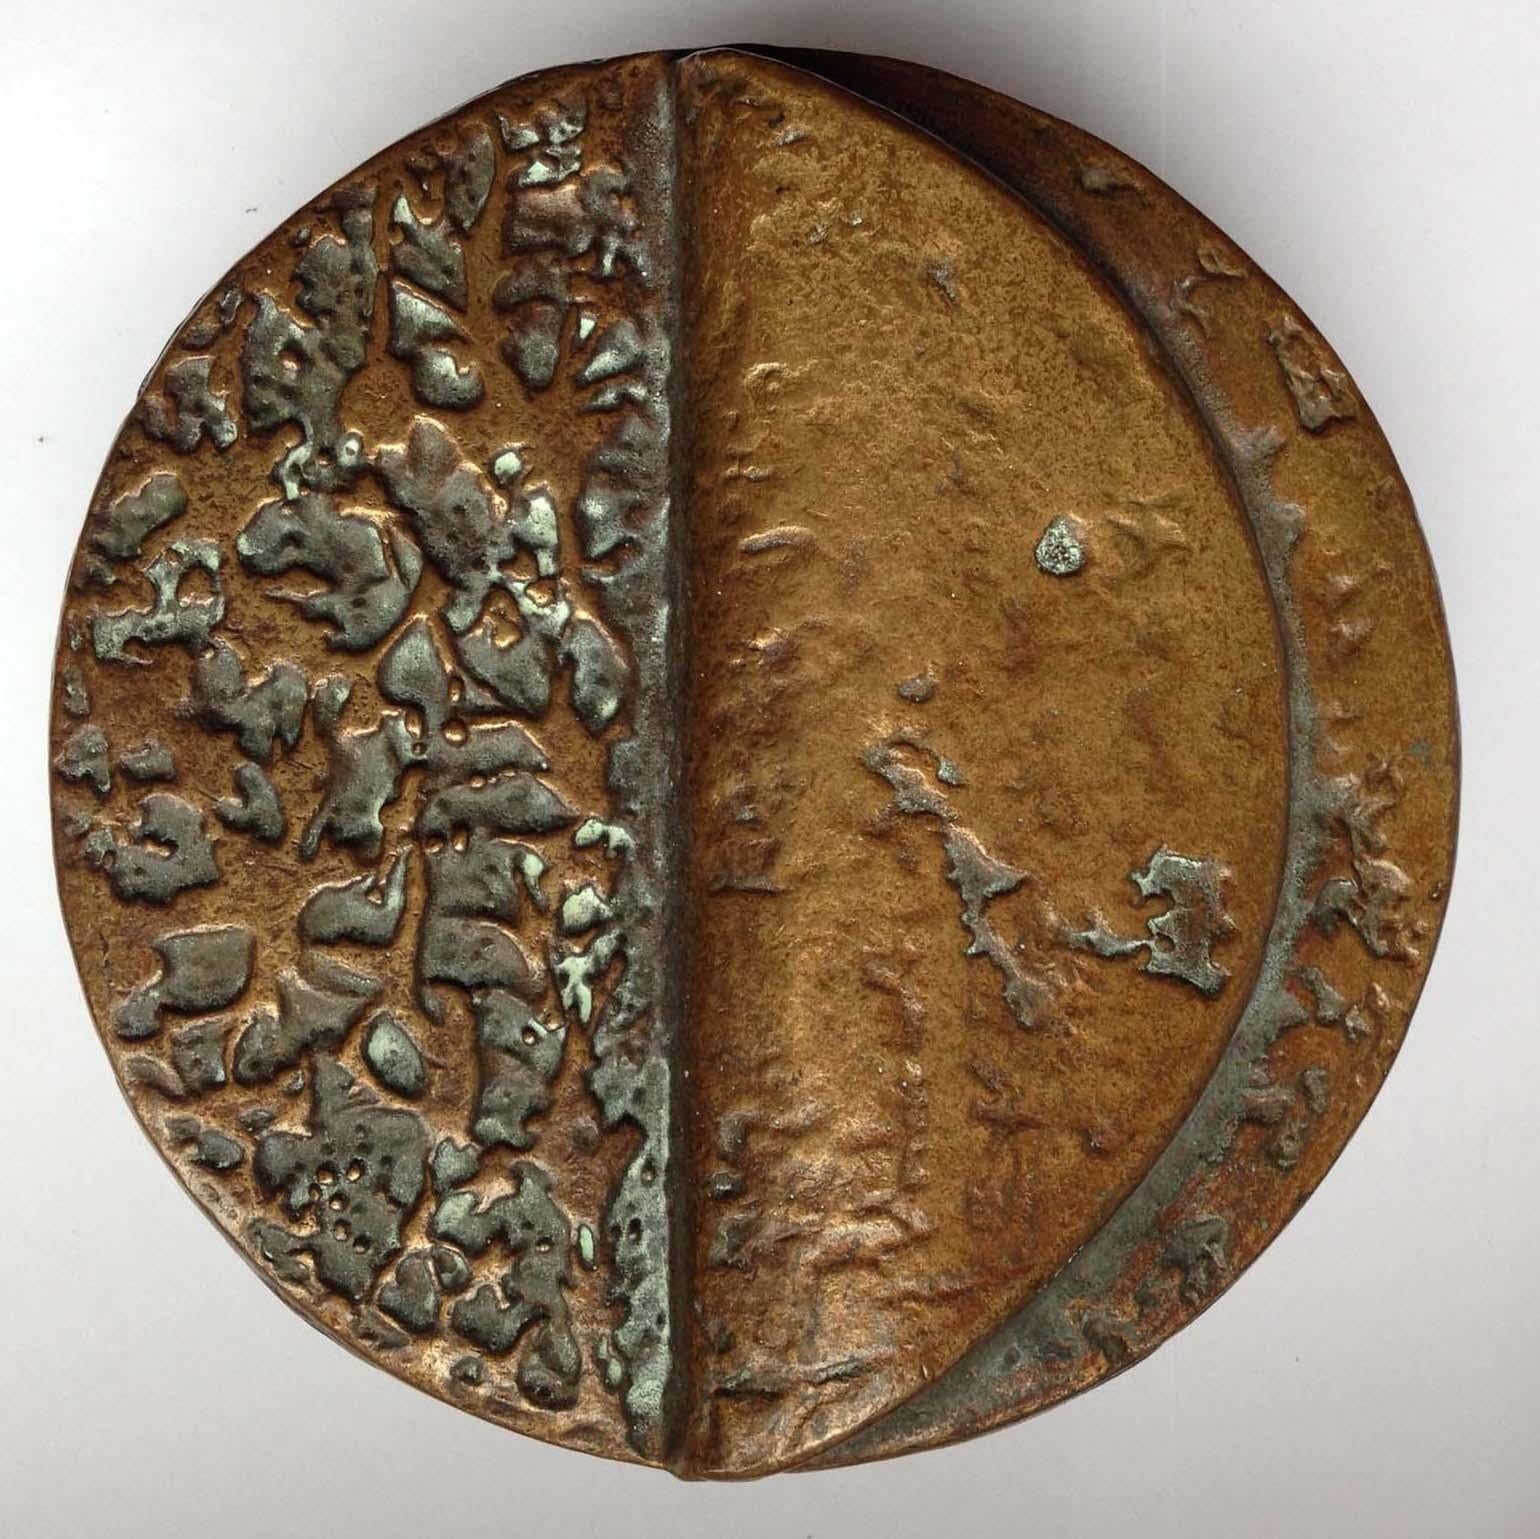 1970's Bronze cast pair of round push and pull door handles with relief that looks like a folded page. The original patina adds to the depth of the relief. The identical handles can be used on pair of double doors or opposite sides of the same door.